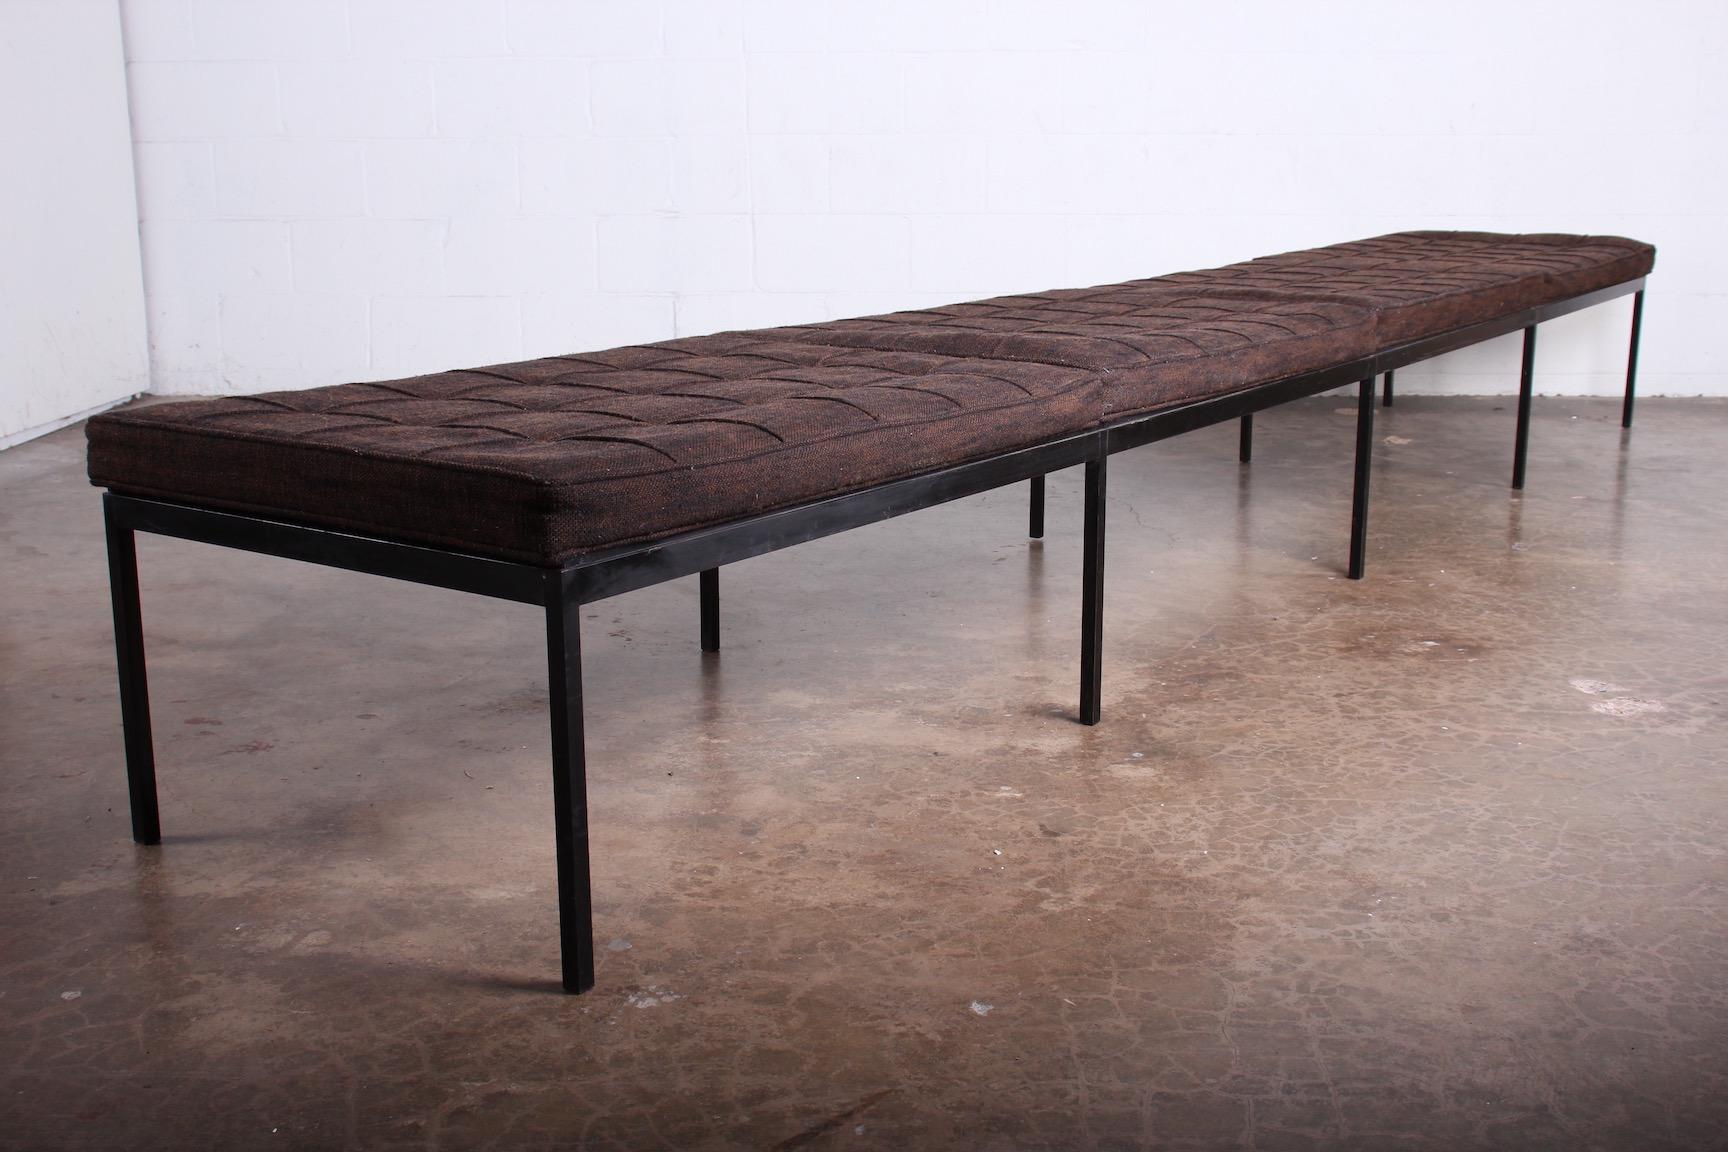 An early and rare bronze museum bench designed by Florence Knoll for Knoll. This 12 foot bench is wider than the standard Knoll benches as well.